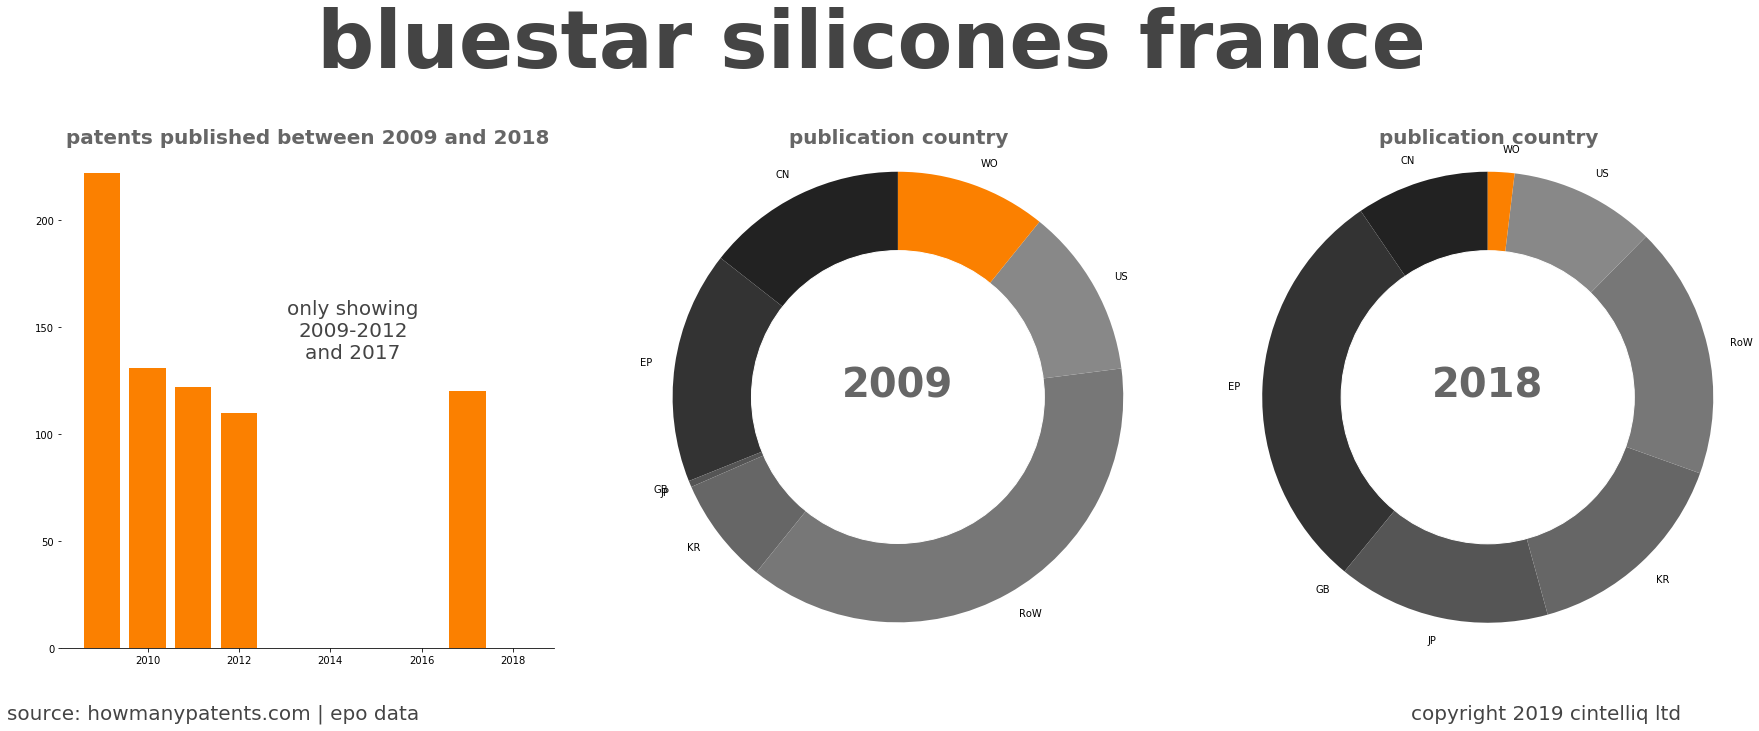 summary of patents for Bluestar Silicones France